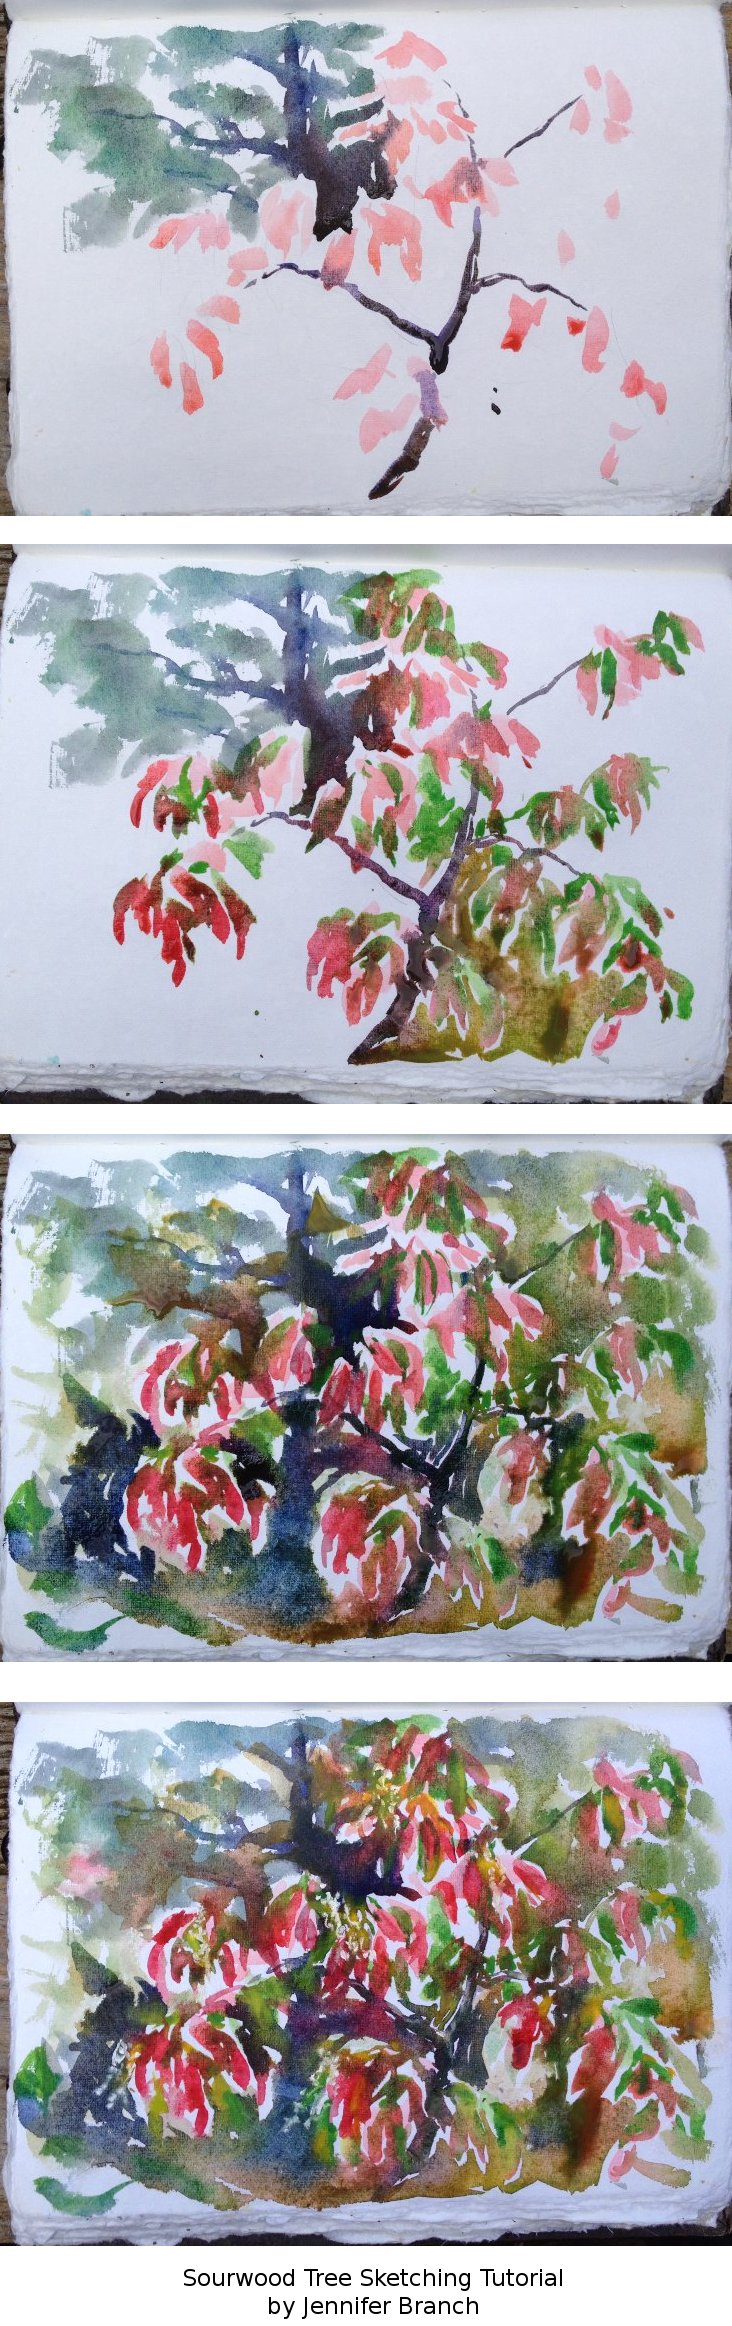 Sketching a Sourwood Tree, Autumn watercolor painting tutorial by Jennifer Branch